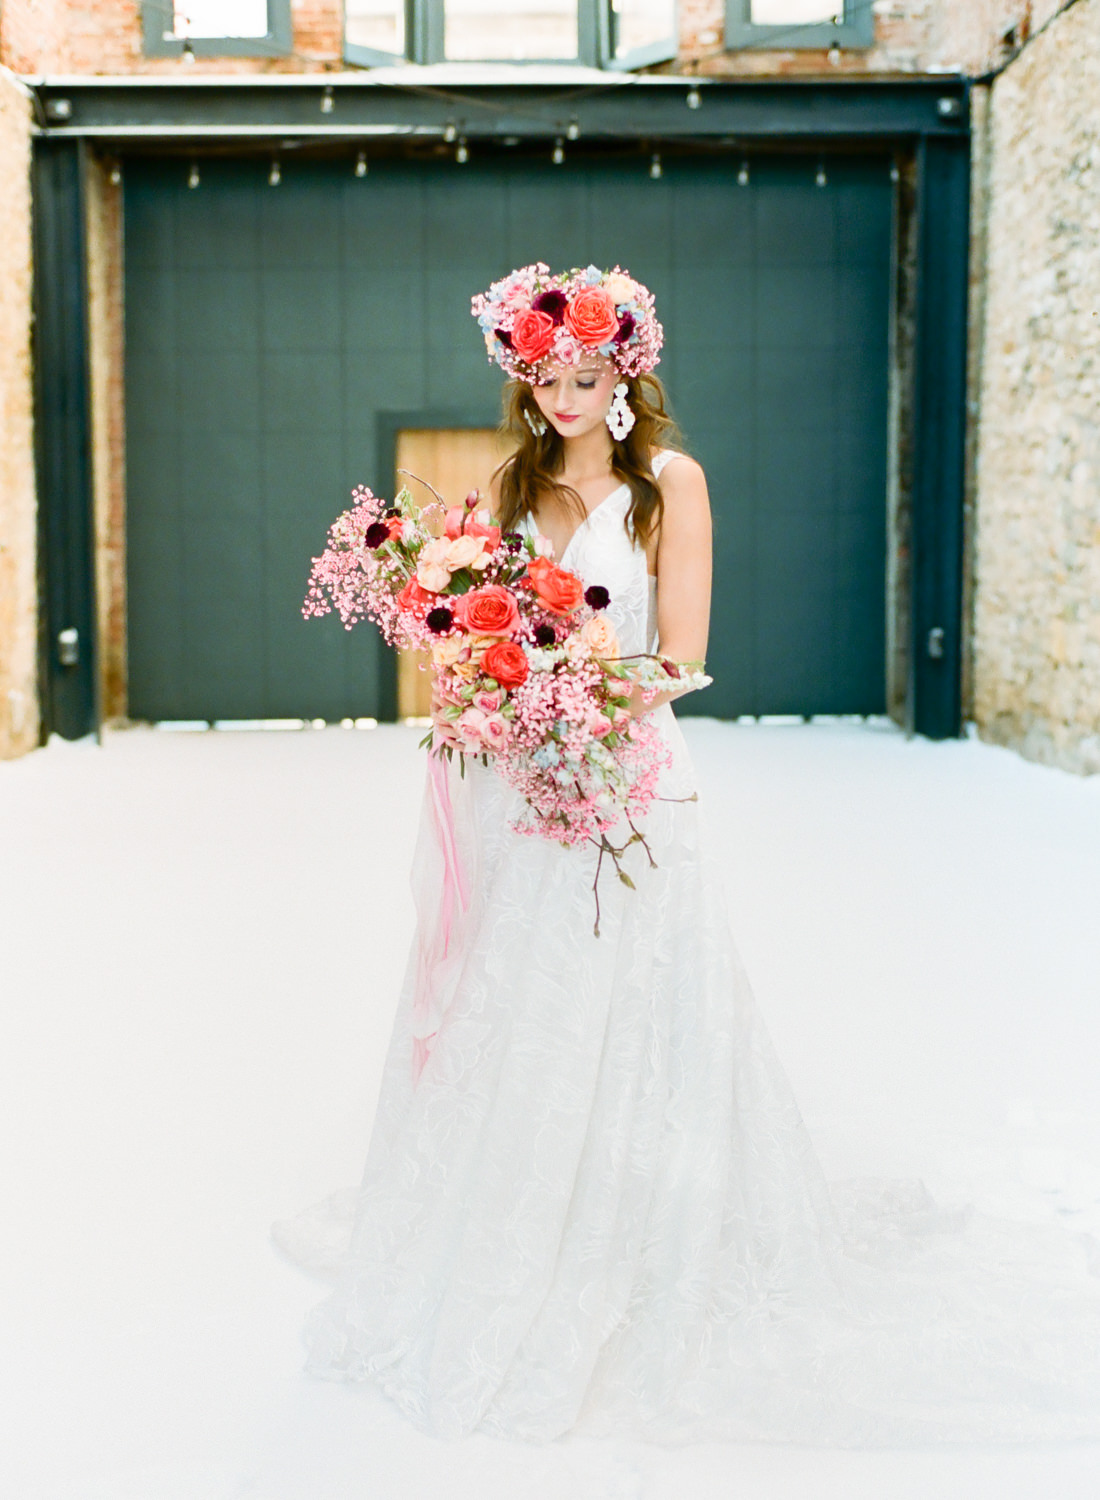 The Rialto in Hannibal, coral and pink bridal flower crown by Lavish Floral Design, St. Louis fine art film wedding photographer Erica Robnett Photography